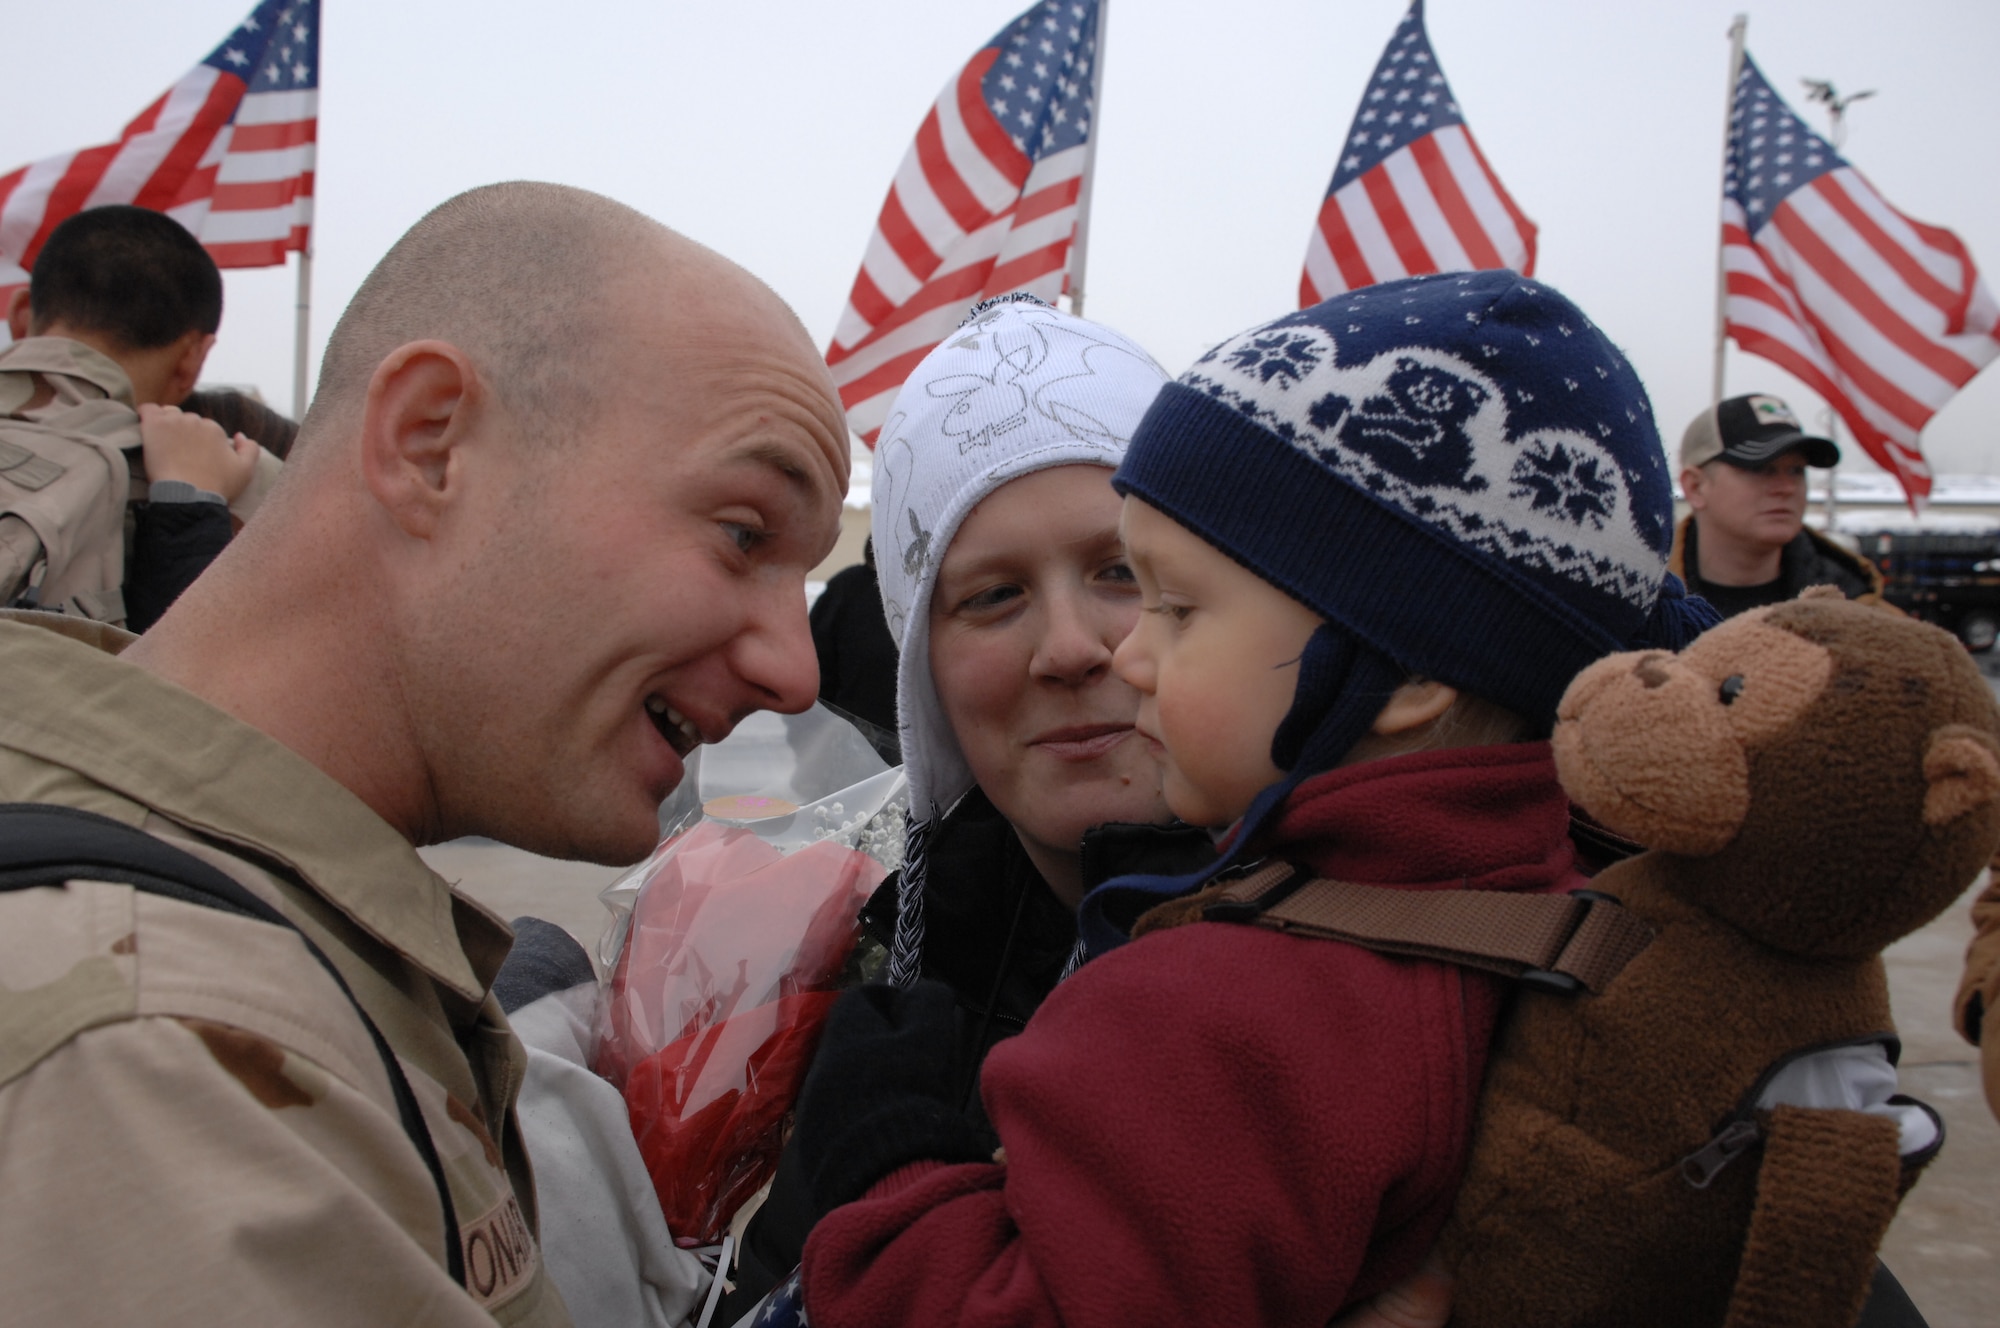 Staff Sgt. Eric Leonhard of the 388th Equipment Maintenance Squadron greets loved ones at the 4th Fighter Squadron homecoming Jan. 8.  The 4th FS deployed to Balad Air Base, Iraq in August and flew approximately 1,800 missions in support of ground forces in Operation Iraqi Freedom.  (U.S. Air Force photo by Alex Lloyd)